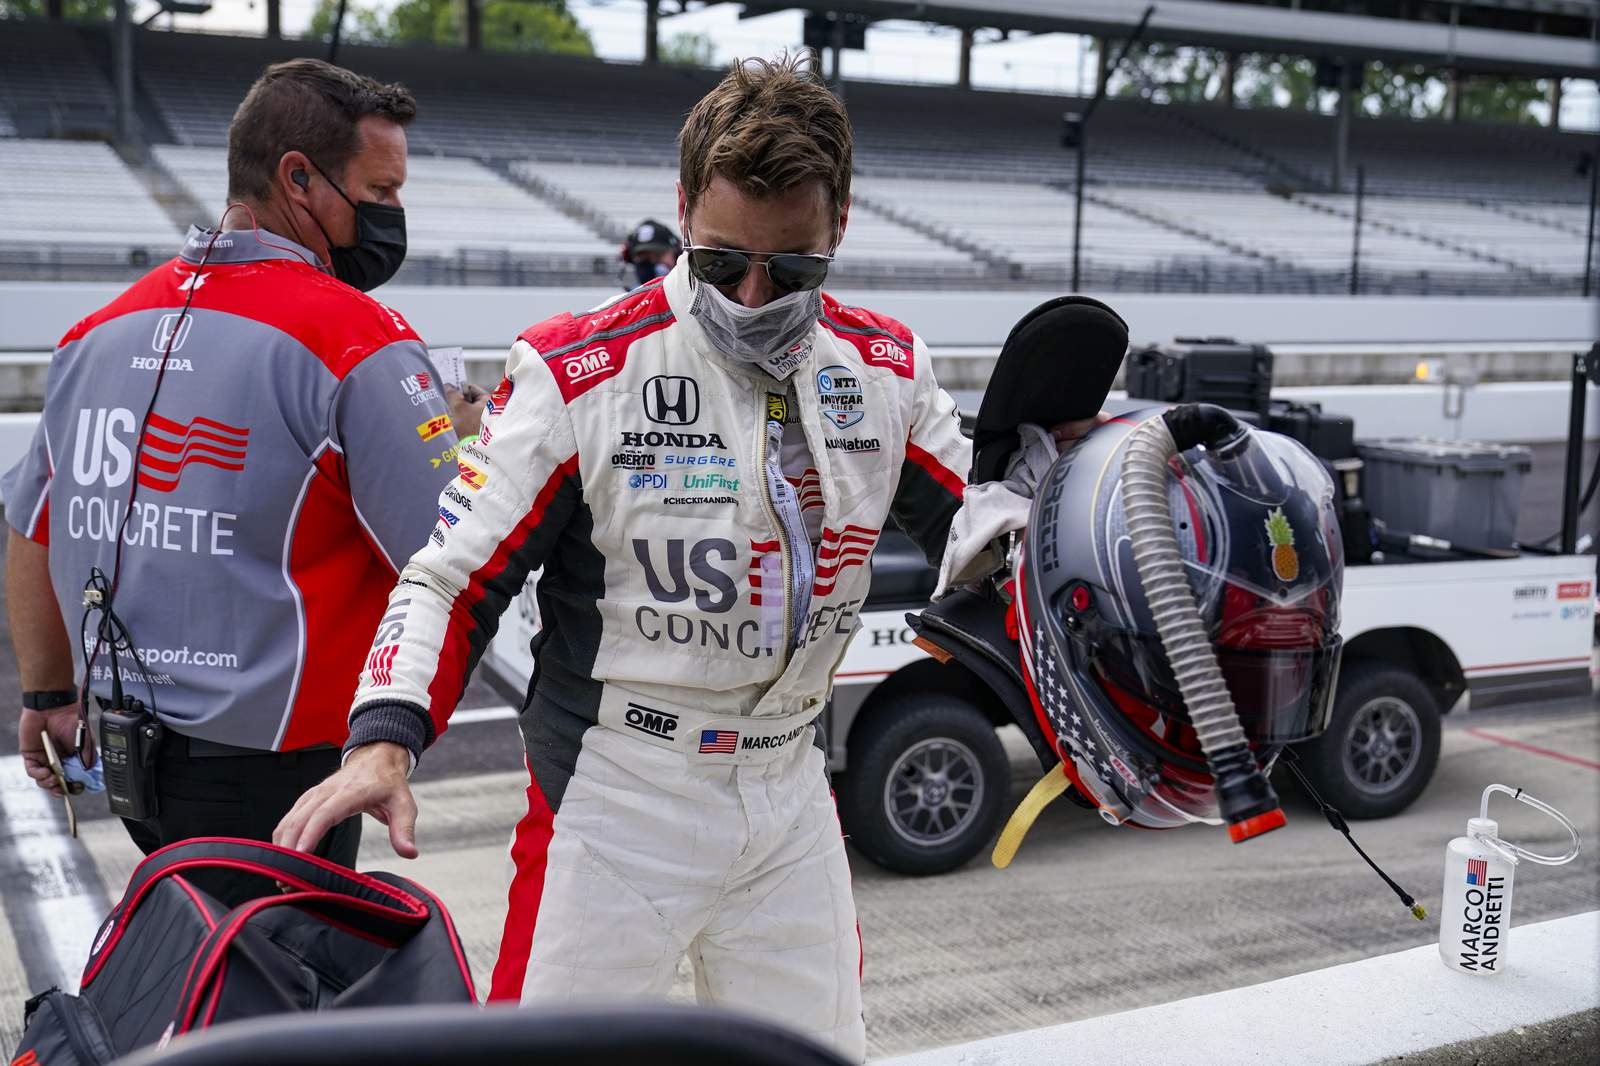 Marco Andretti breaks 233 mph on 'Fast Friday' at Indy